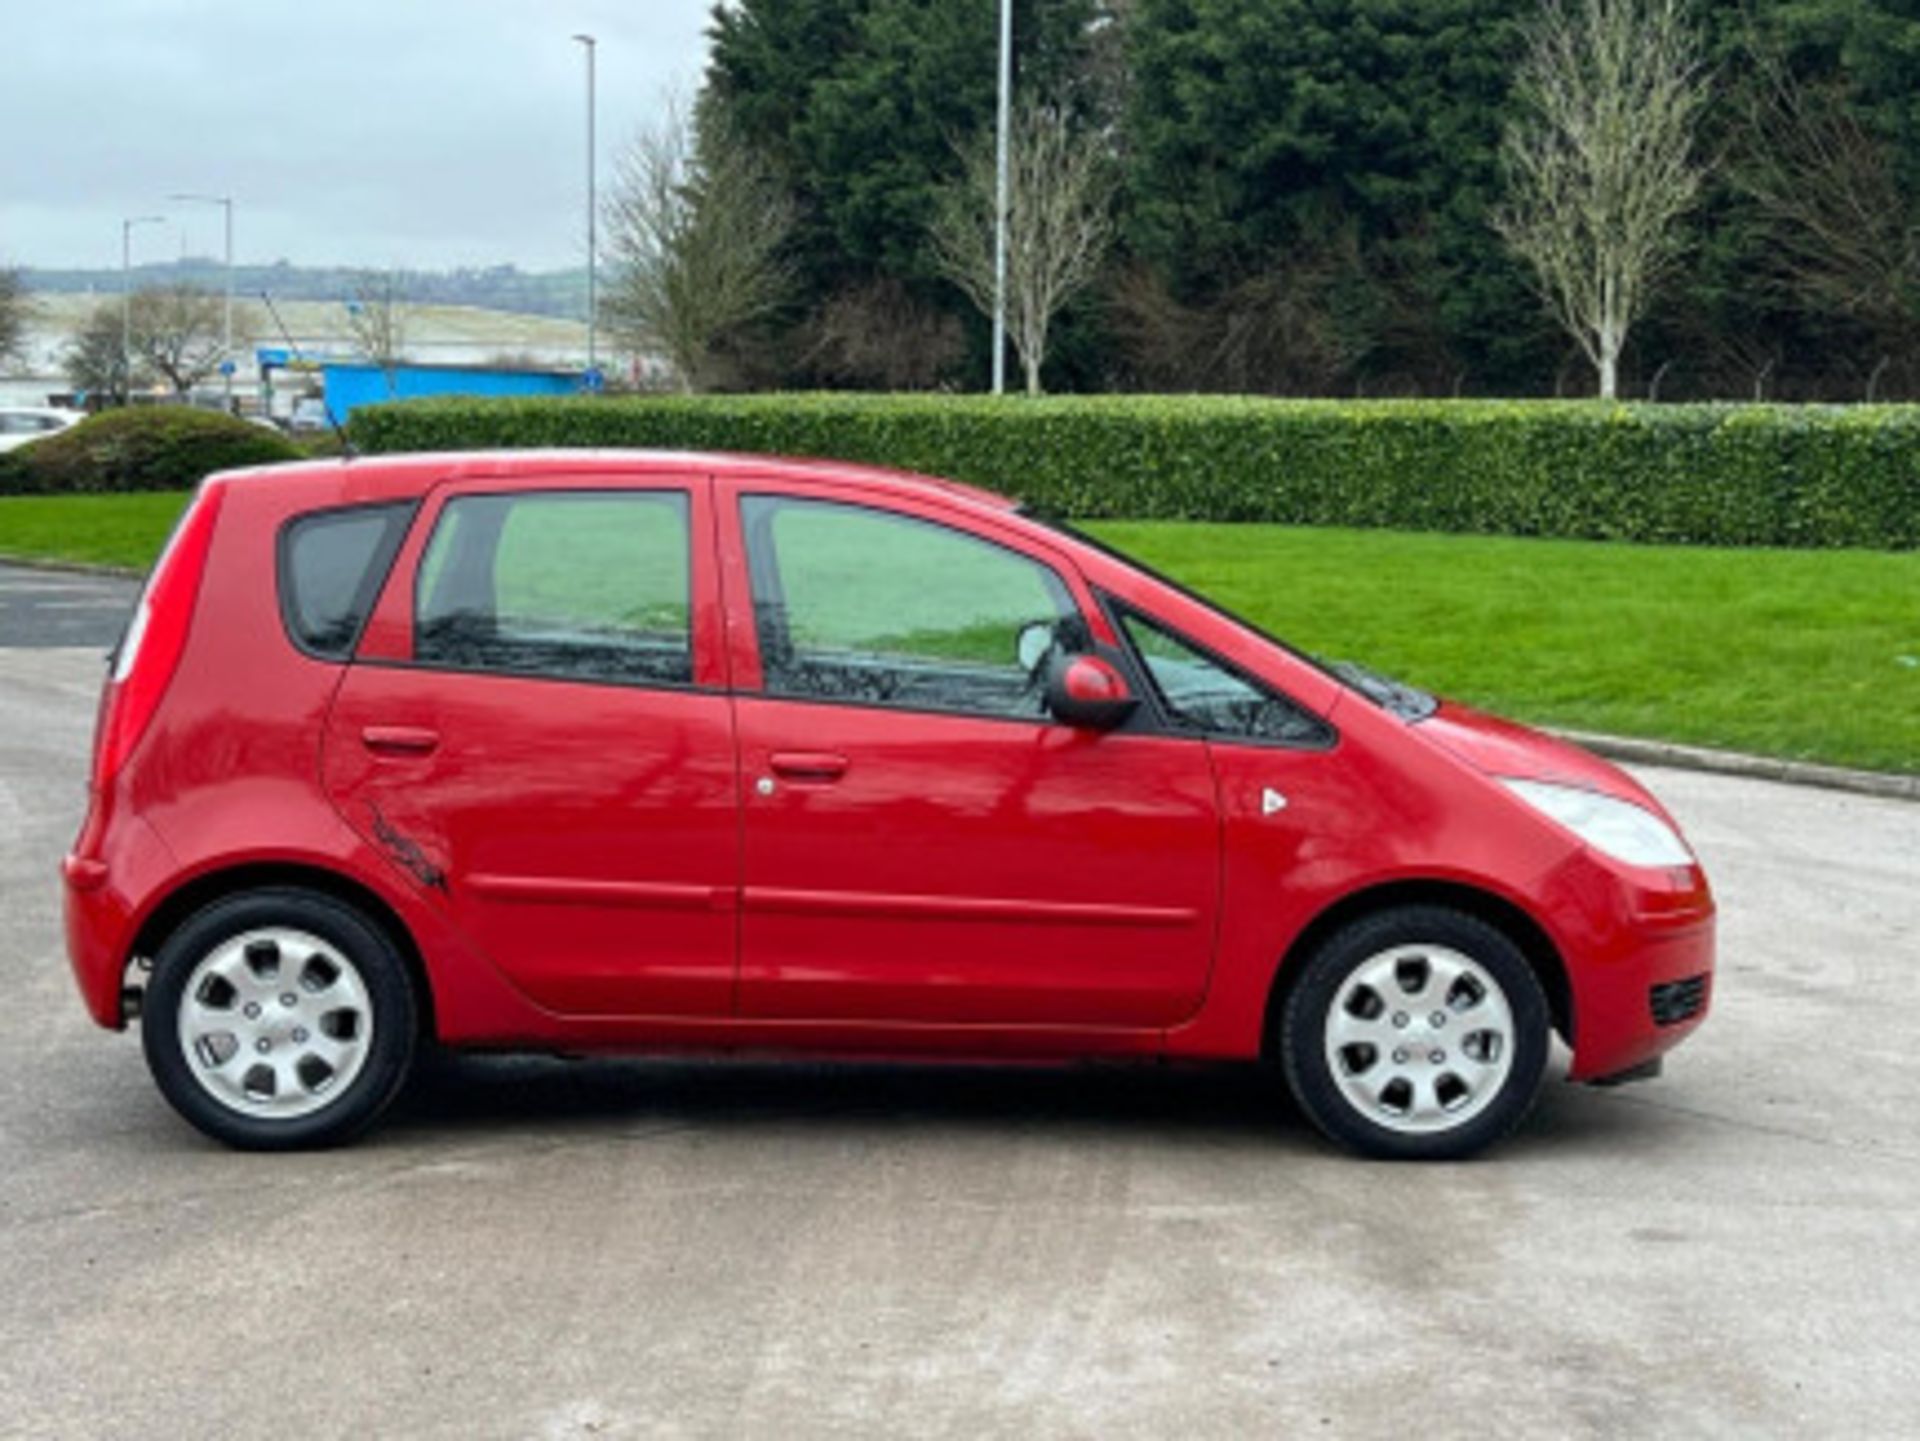 2007 MITSUBISHI COLT 1.5 DI-D DIESEL AUTOMATIC >>--NO VAT ON HAMMER--<< - Image 24 of 191